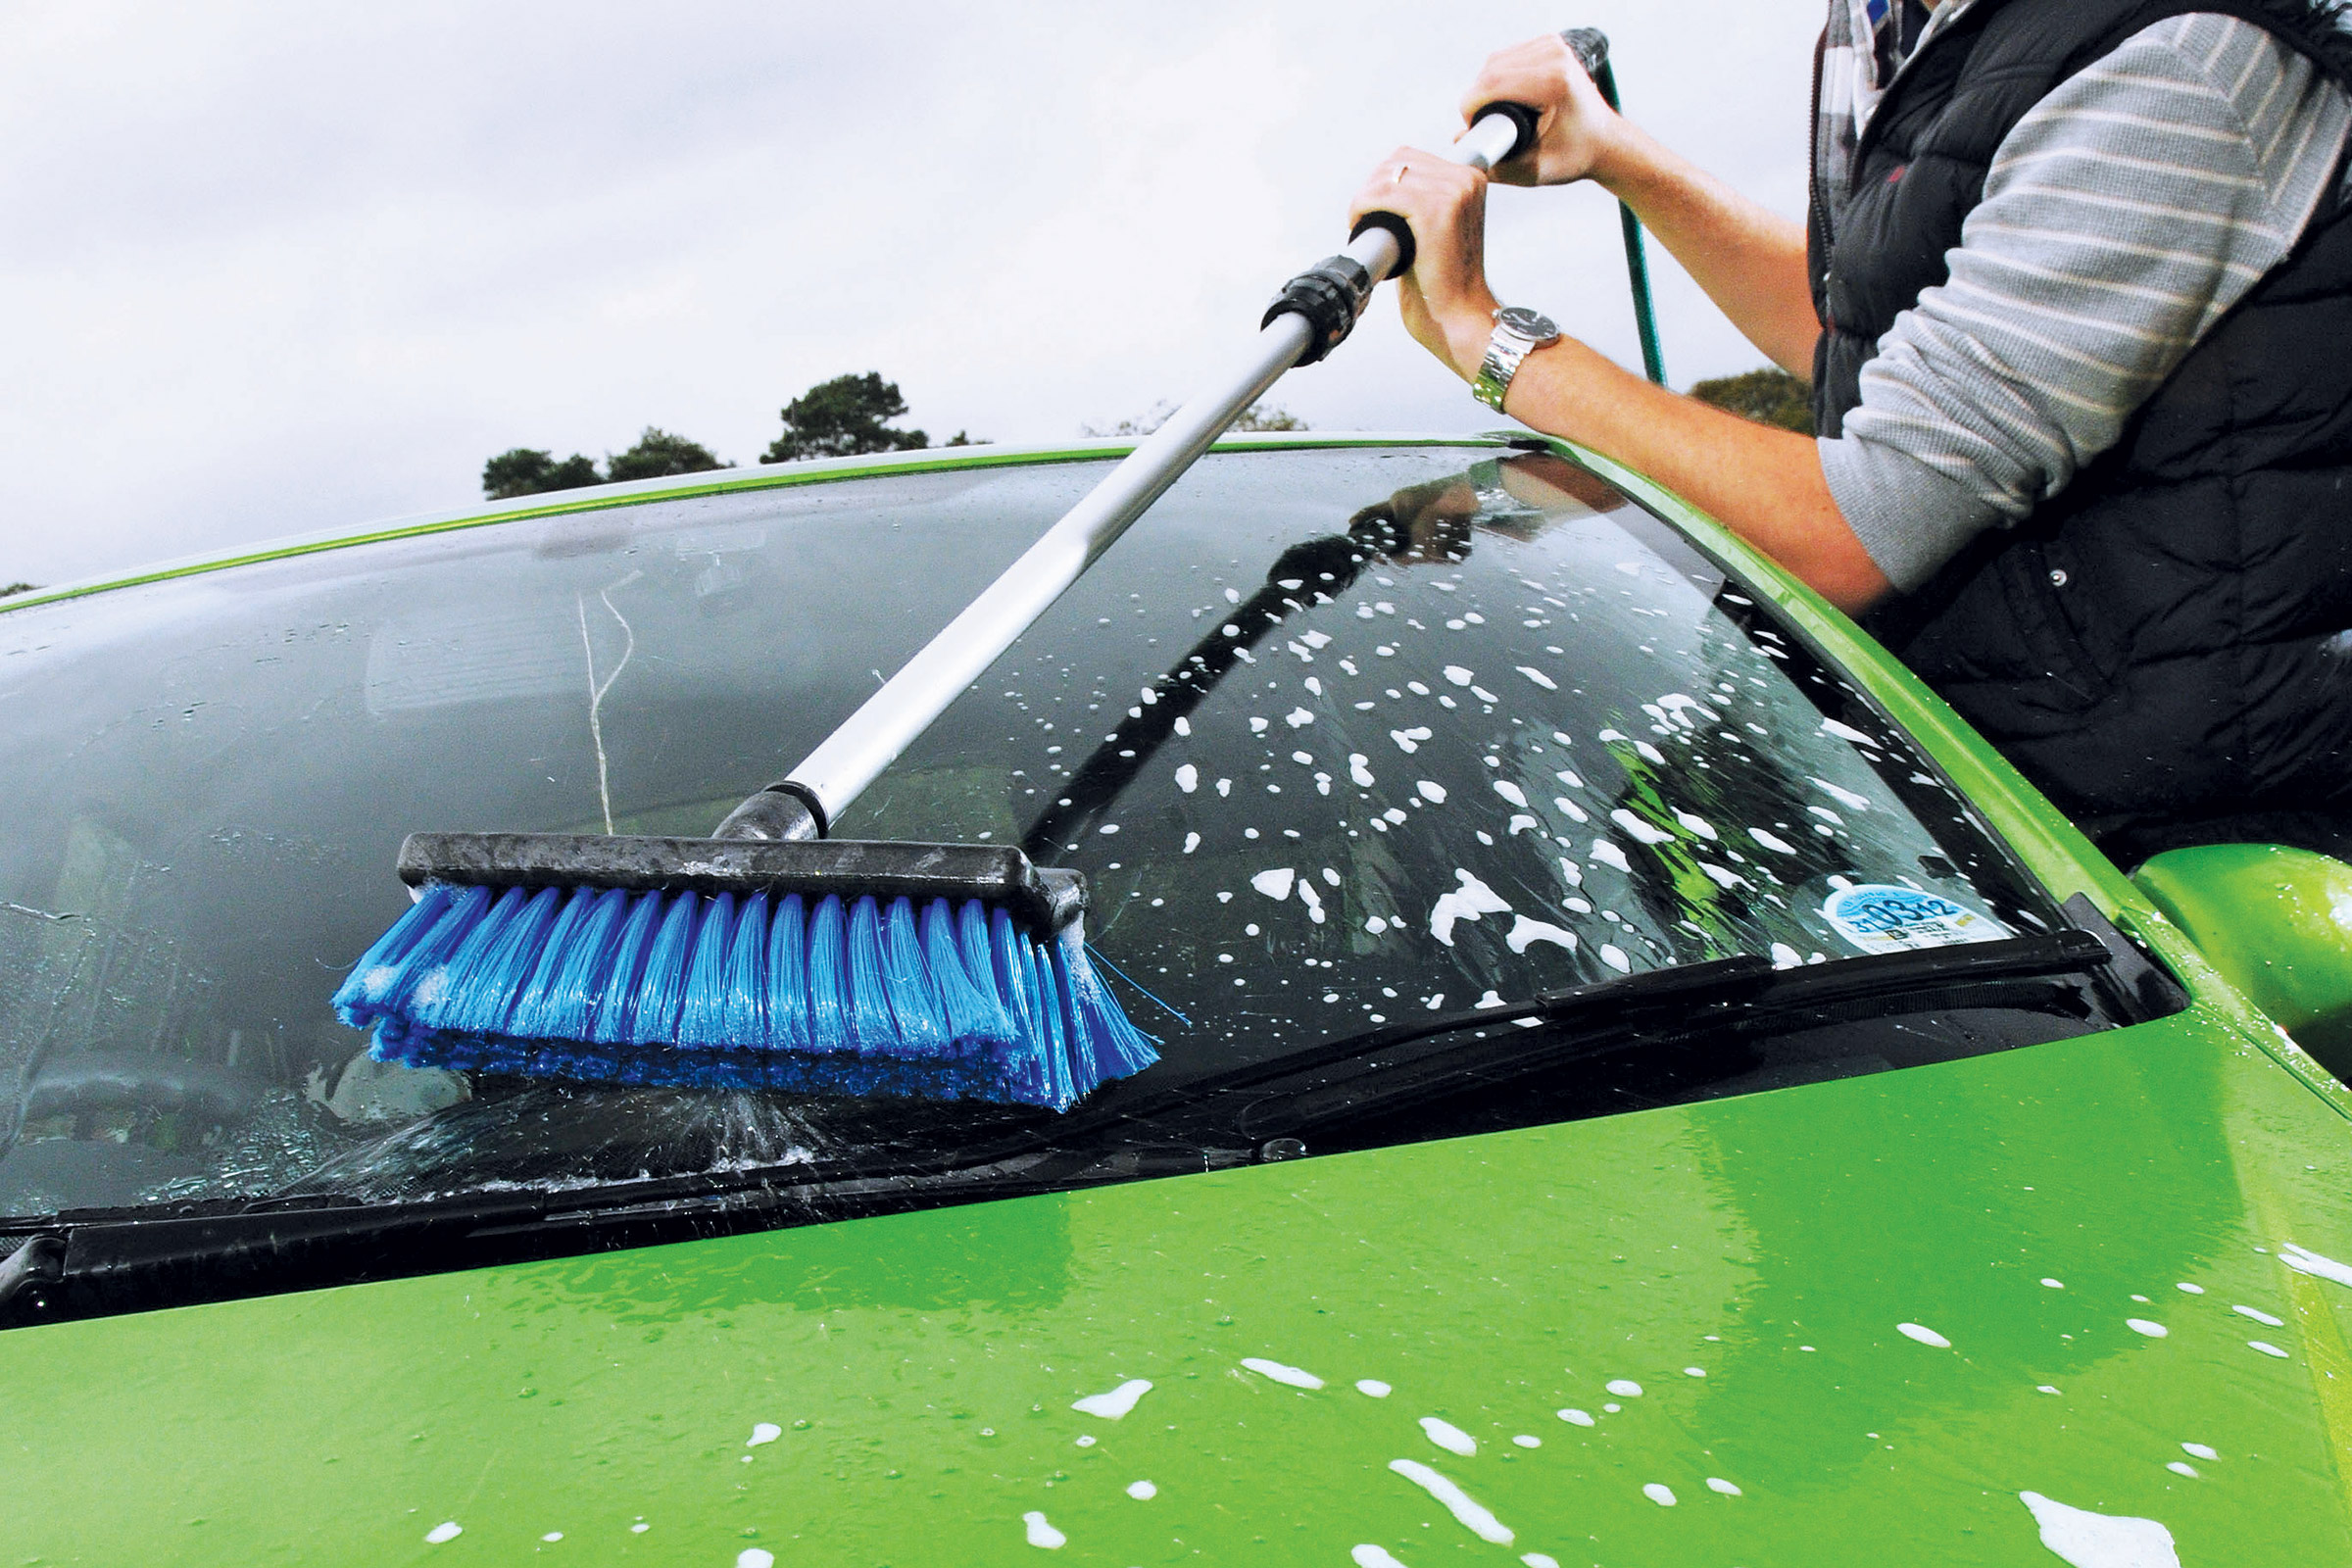 Best car wash brushes to buy